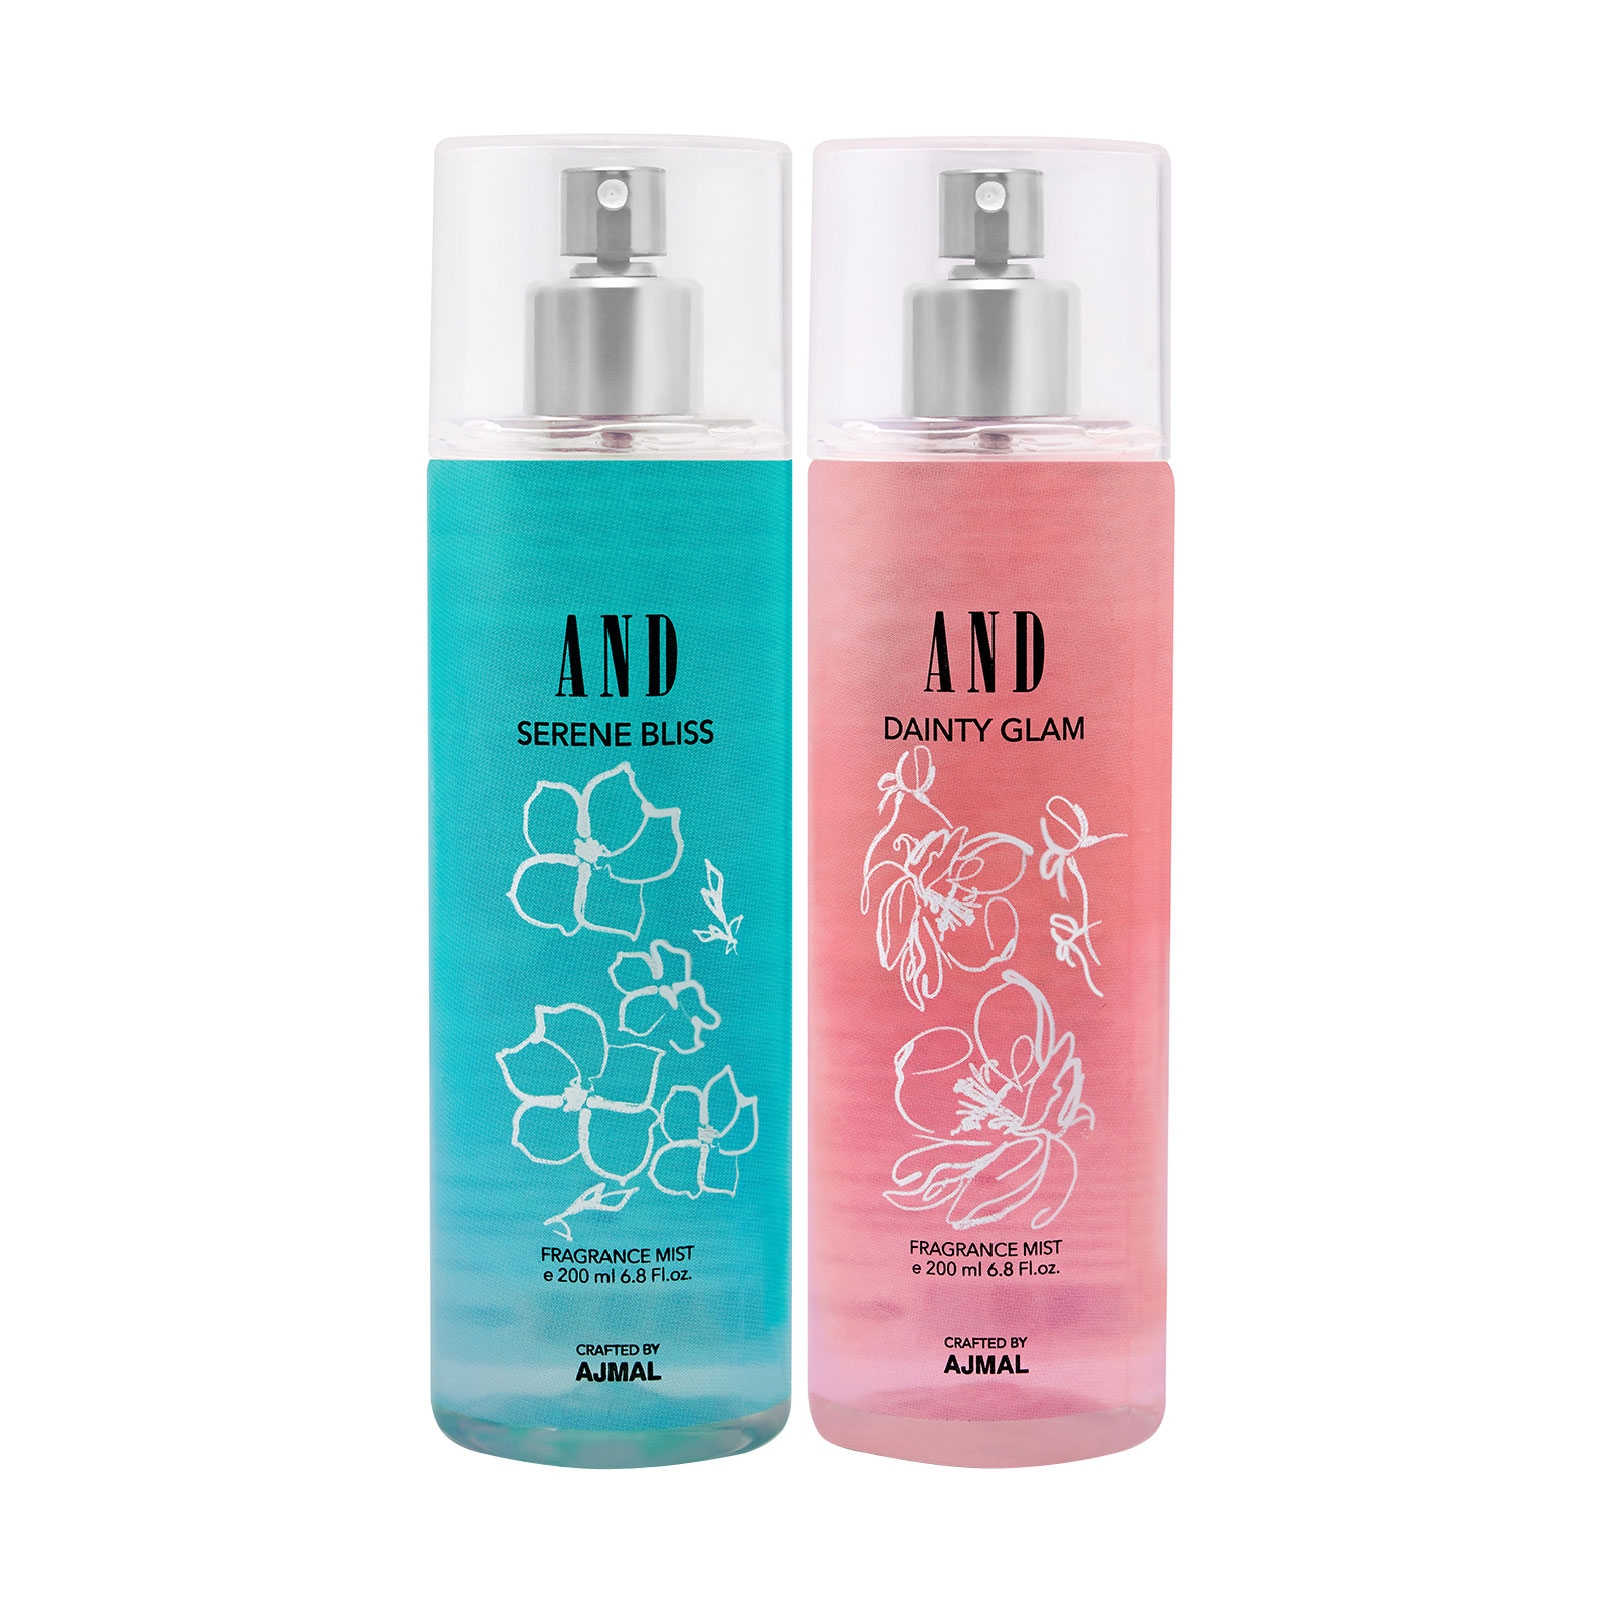 AND Crafted By Ajmal | AND Serene Bliss & Dainty Glam Pack of 2 Body Mist 200ML each for Female Crafted by Ajmal + 2 Parfum Testers